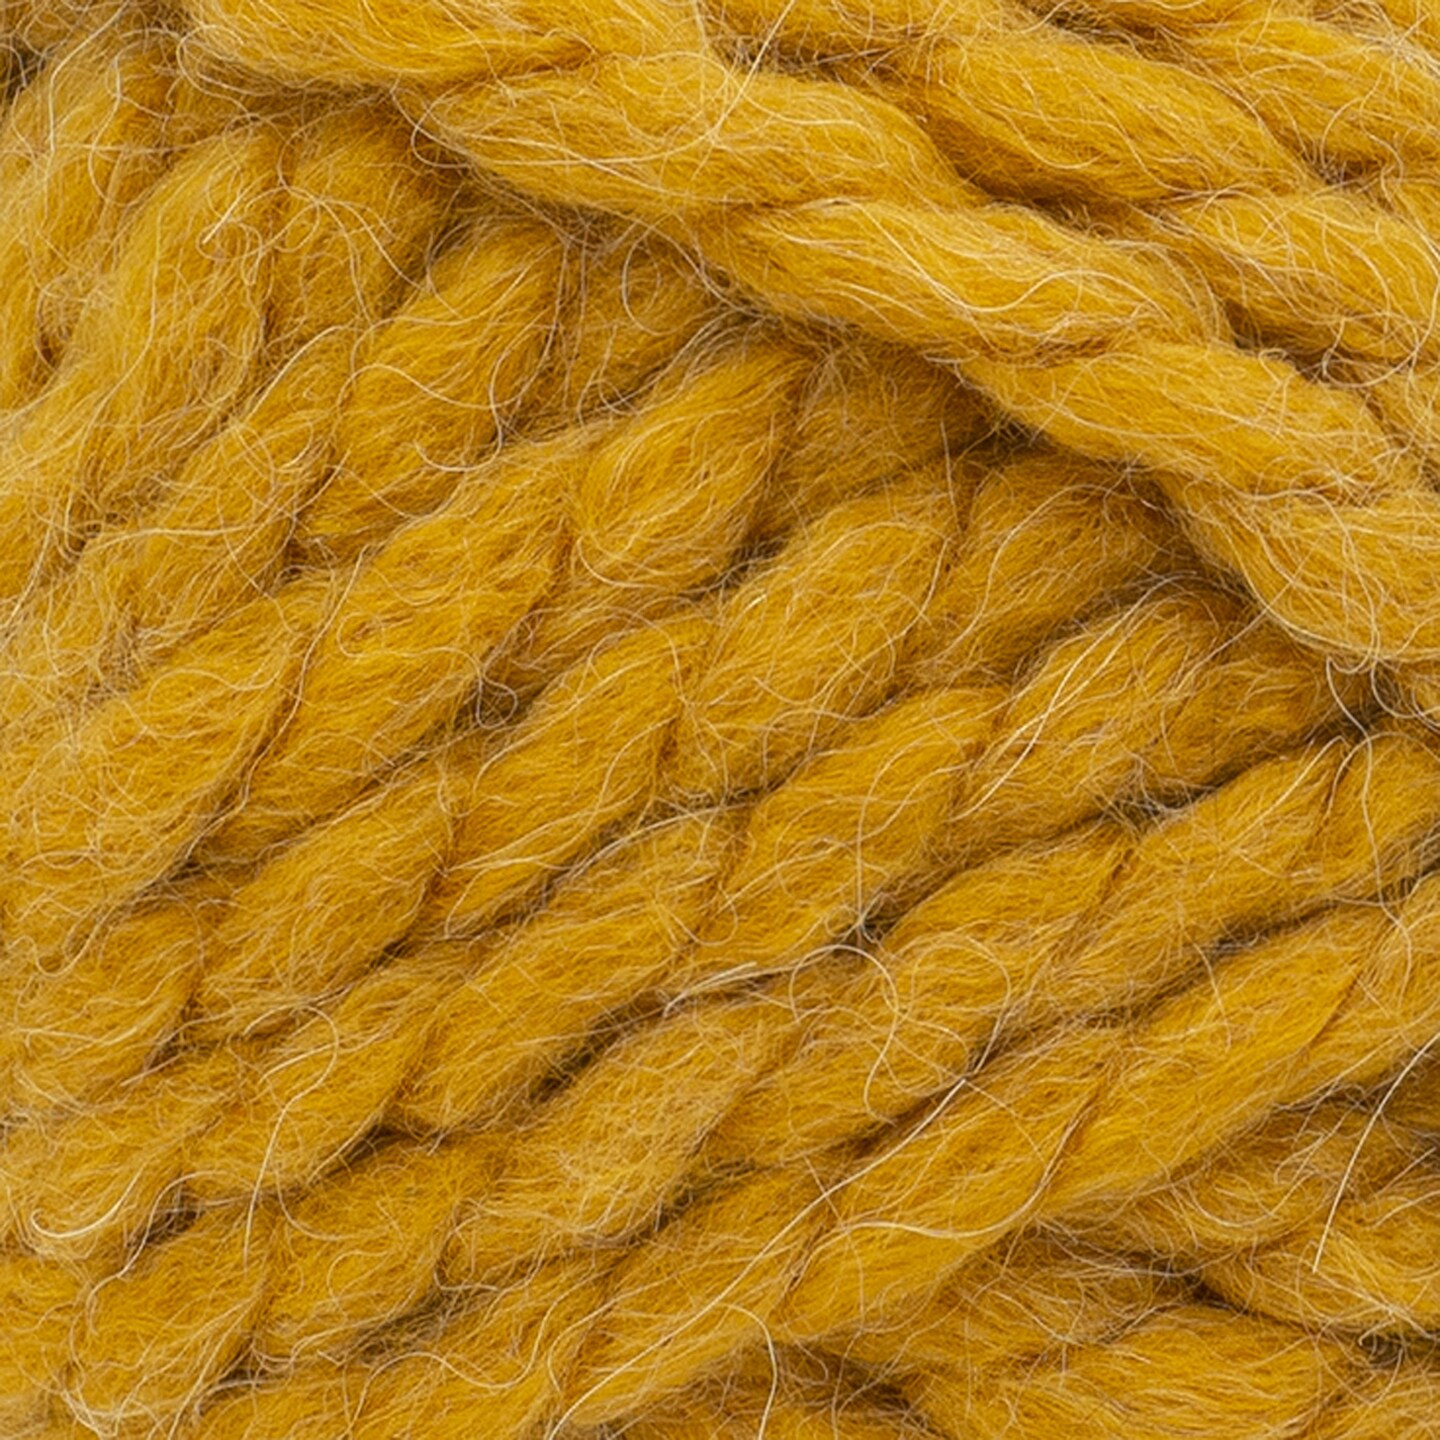 Touch of Alpaca® Thick & Quick® Yarn